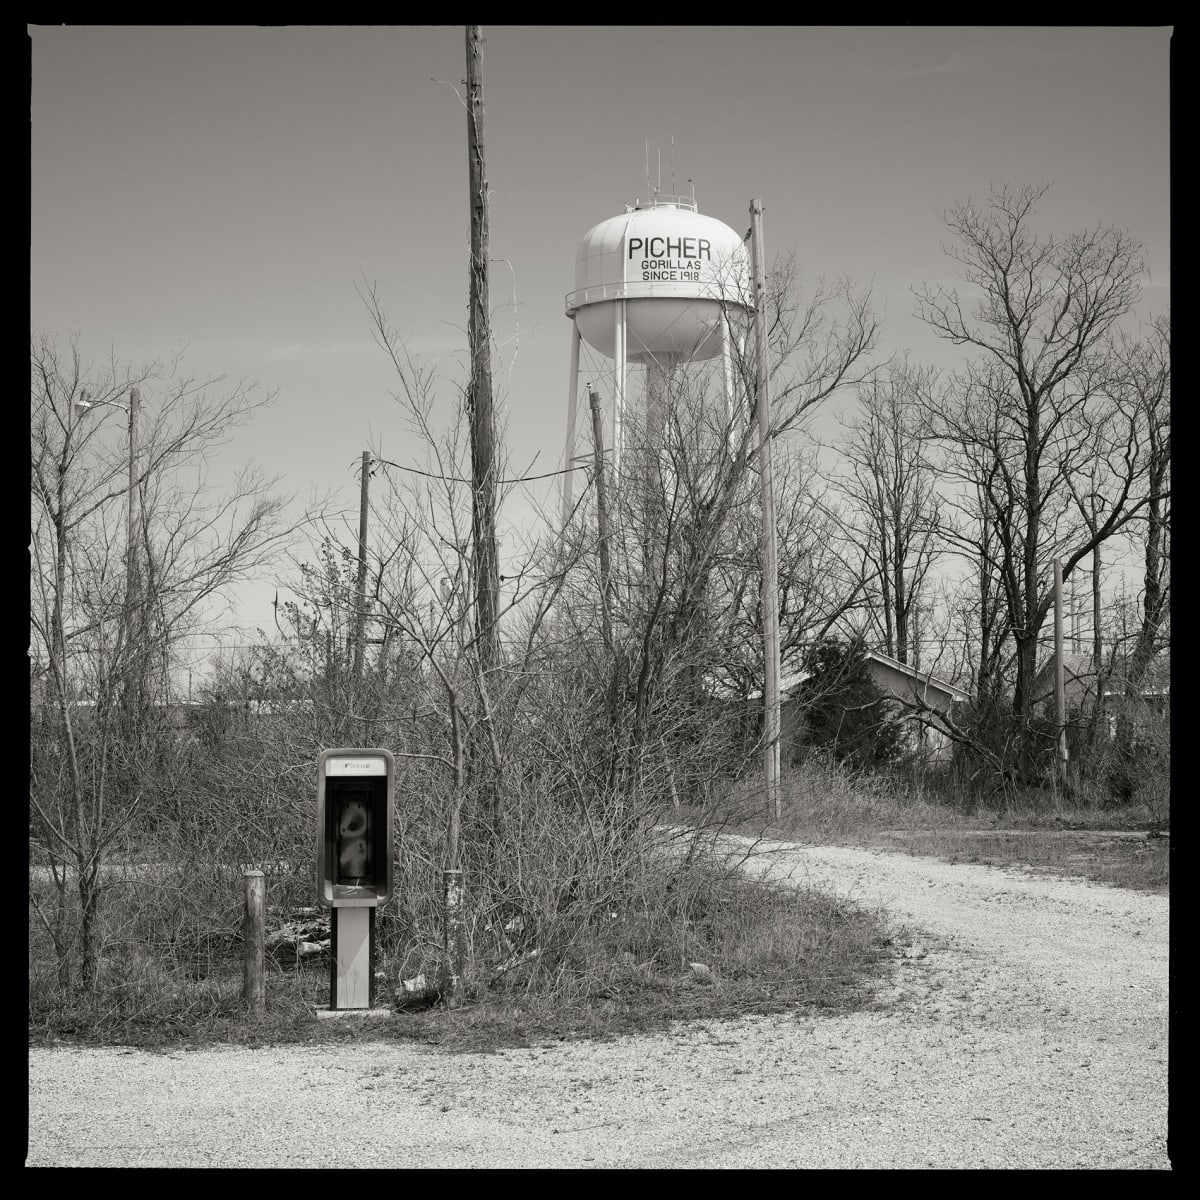 Unknown Number- Superfund Site, Picher, OK by Eric T. Kunsman  Image: ID: A black and white image shows a gravel path that loops around to the left. There is a payphone in just behind the path on the left.  There is a water tower to the right of the path further back.